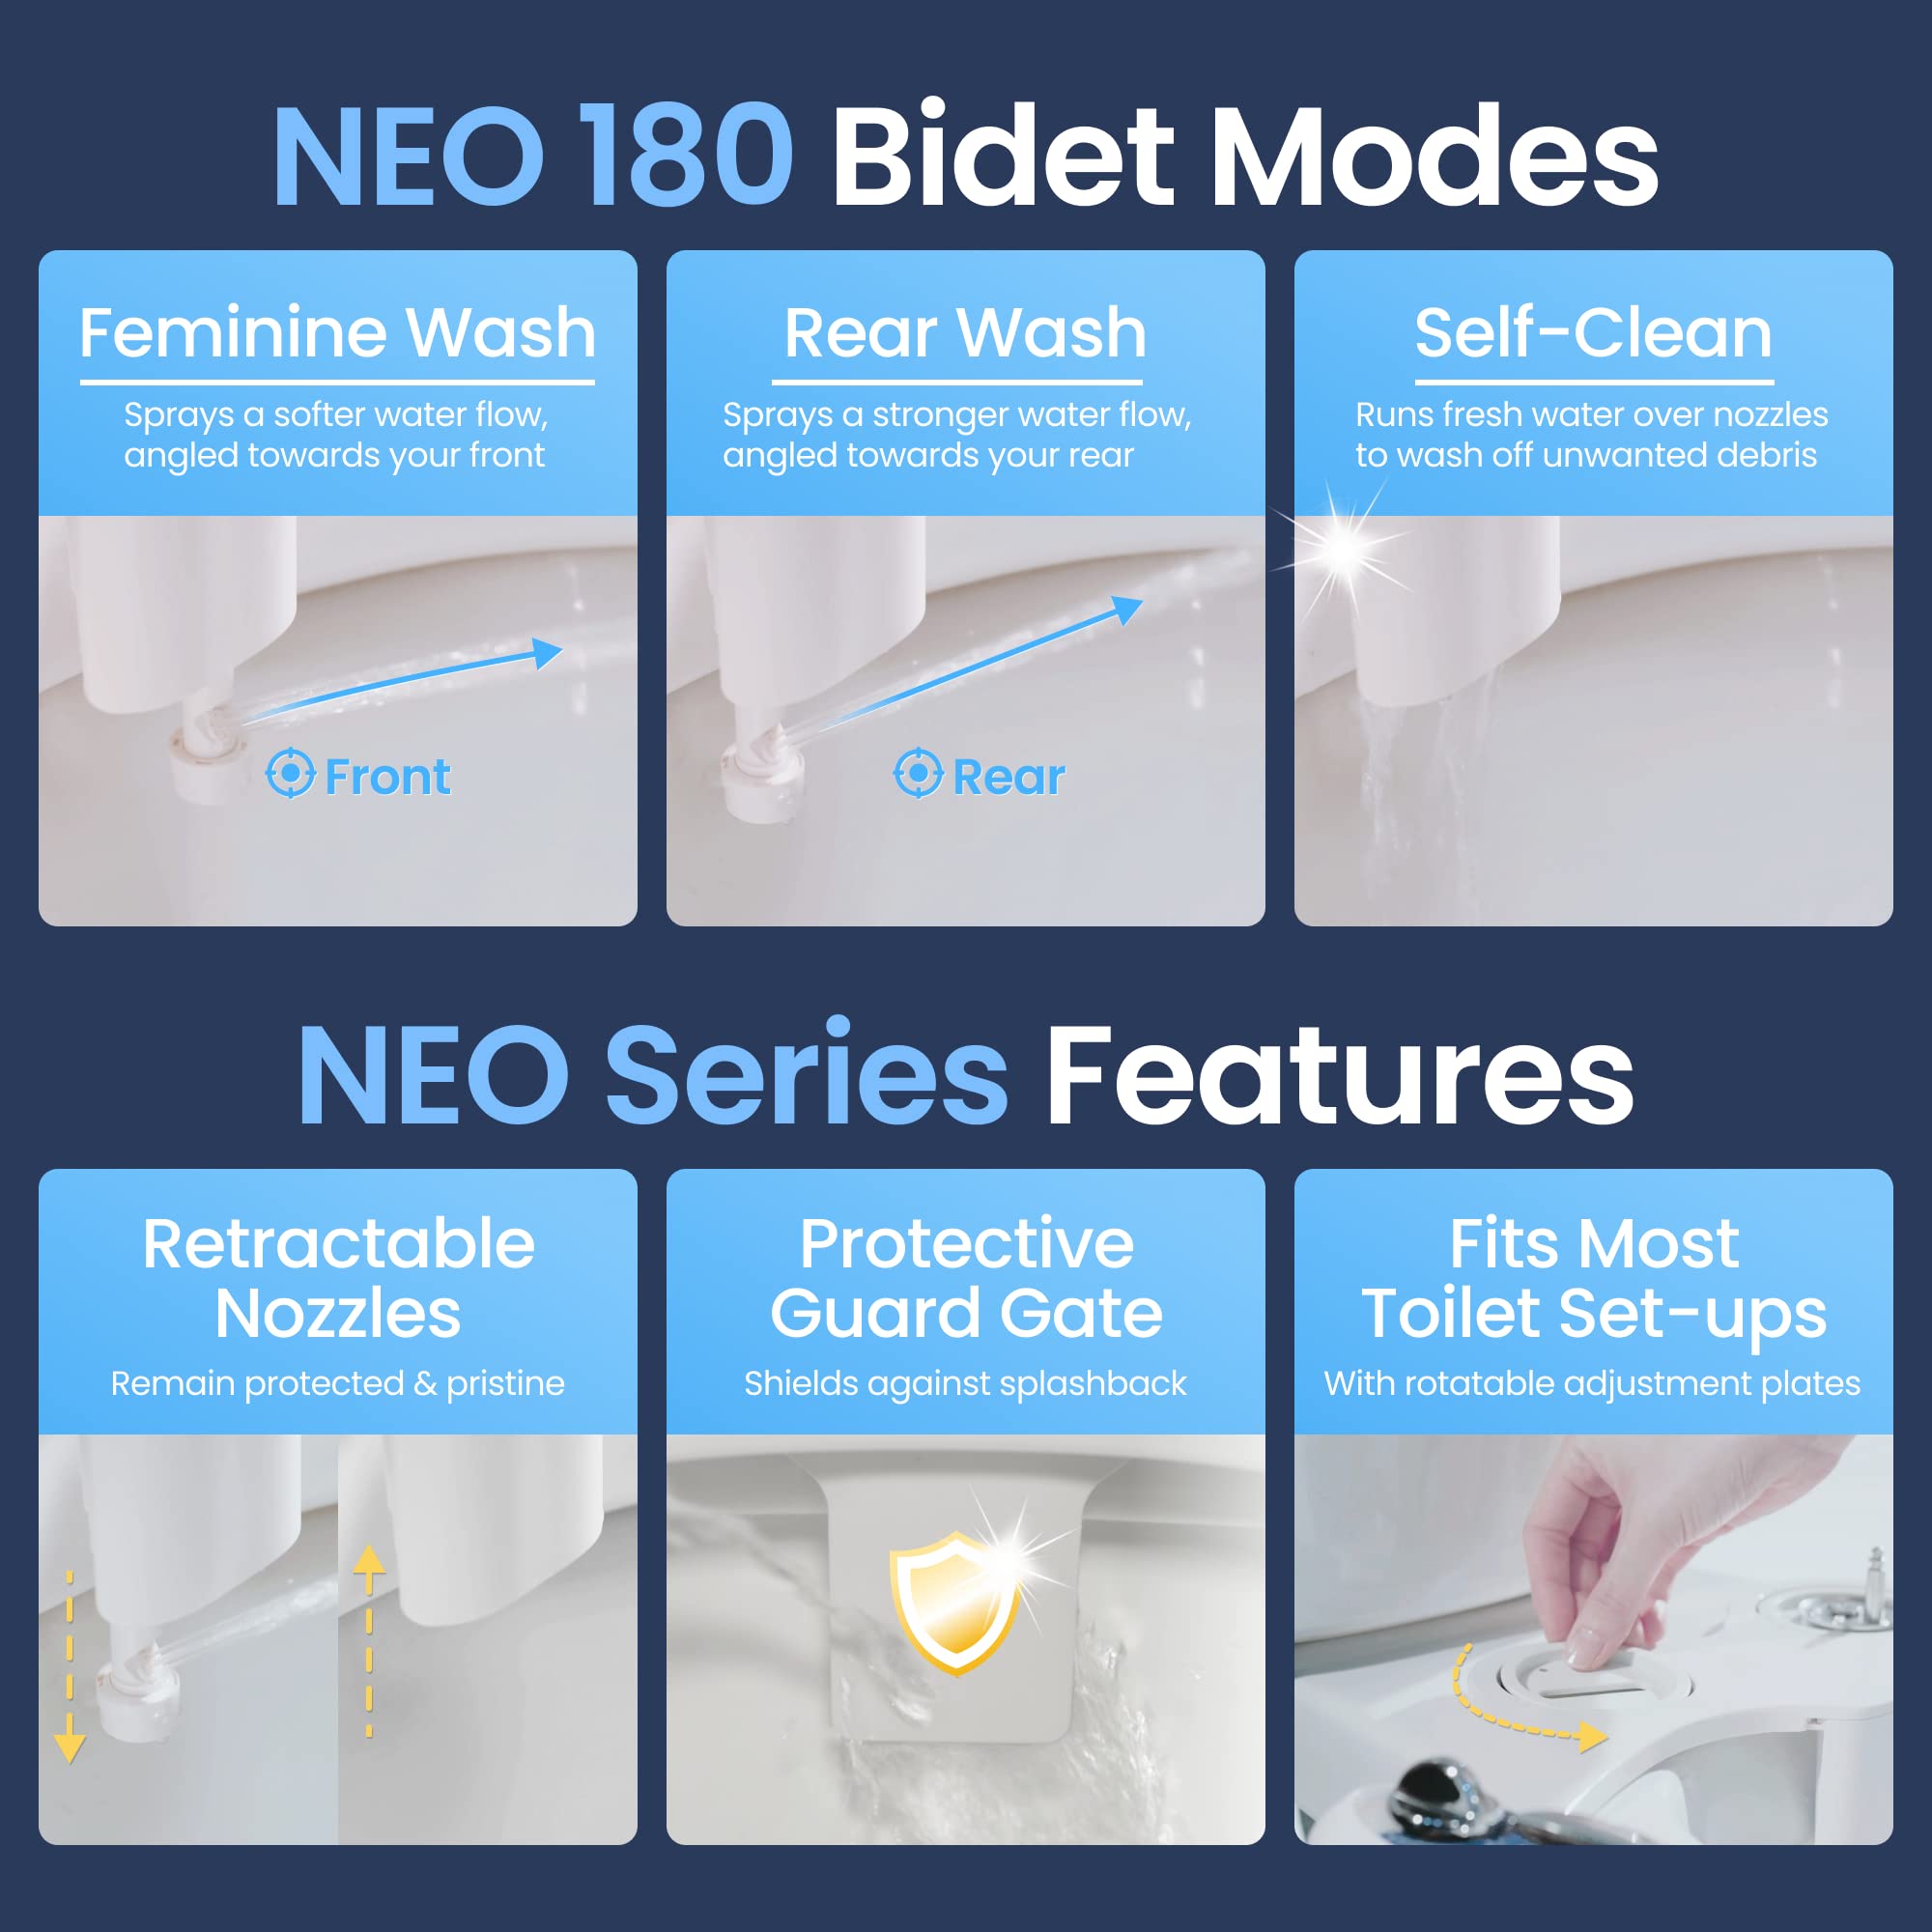 LUXE Bidet NEO 180 - Self-Cleaning, Dual Nozzle, Non-Electric Bidet Attachment for Toilet Seat, Adjustable Water Pressure, Rear and Feminine Wash, Lever Control (Blue), 13.5 x 7 x 3 inches